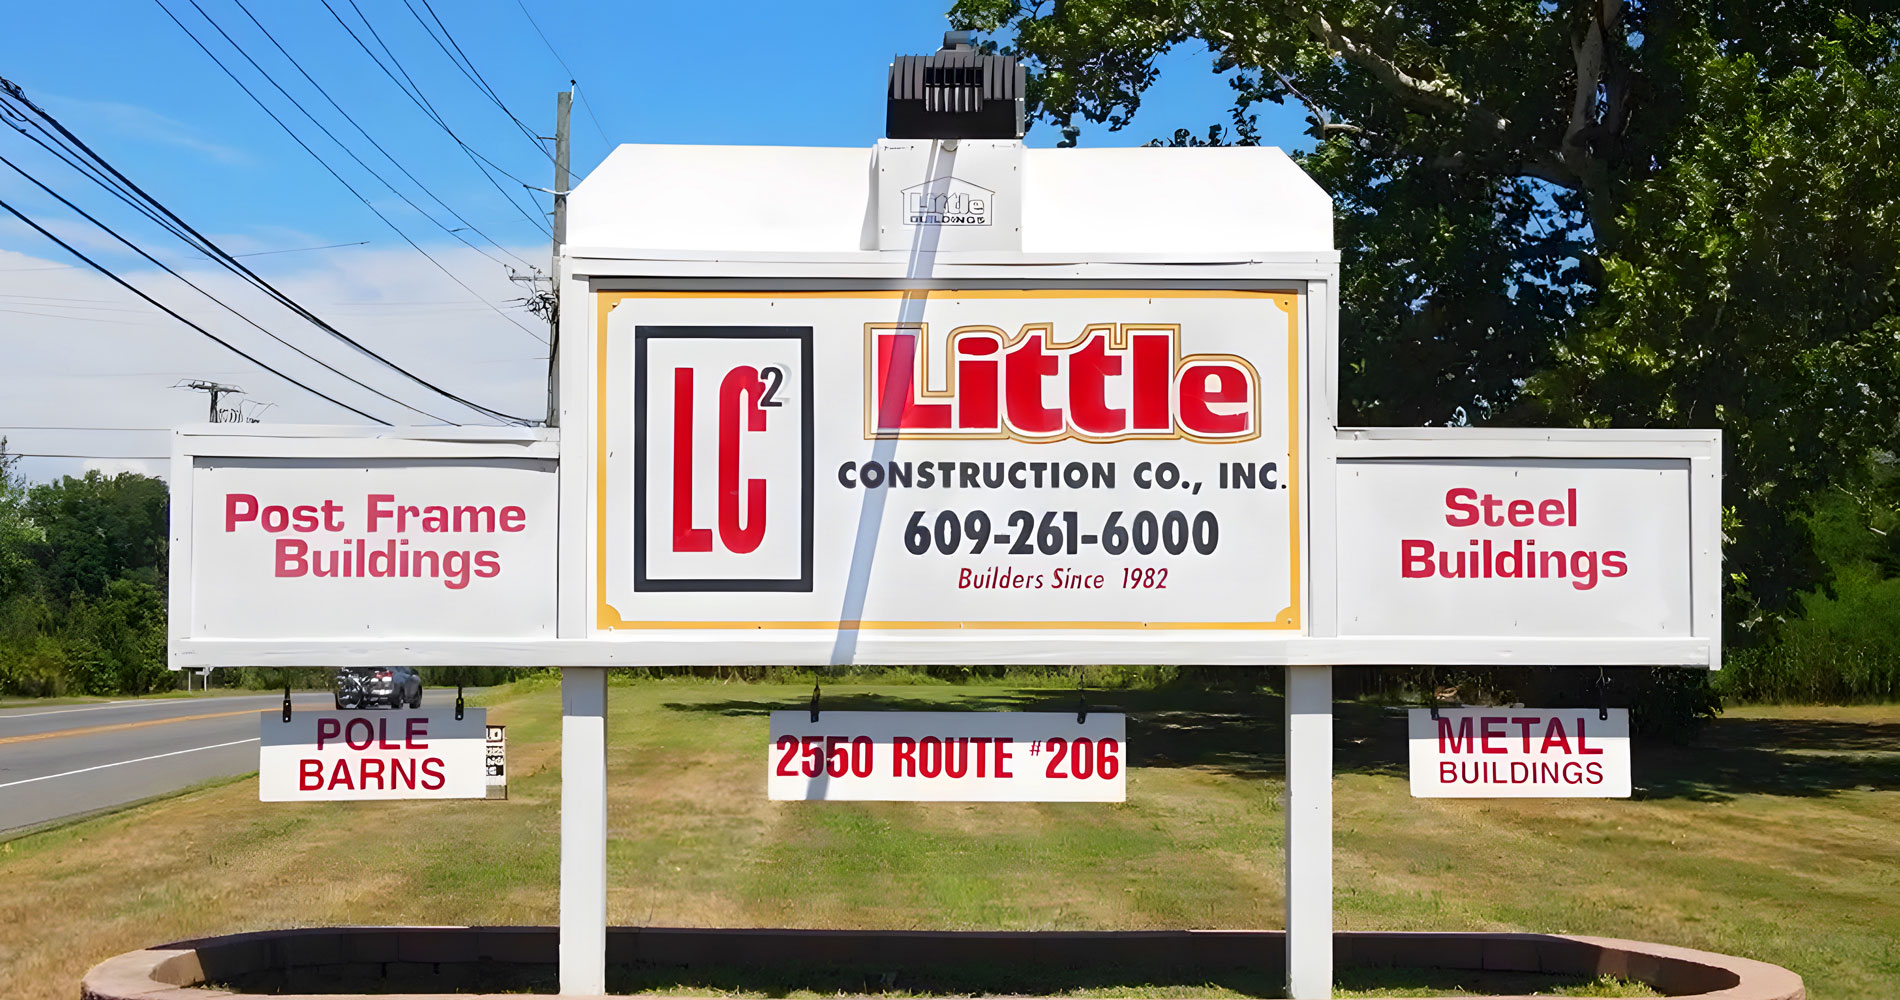 Post Frame Construction Building in South Jersey | Little Construction Co., Inc.